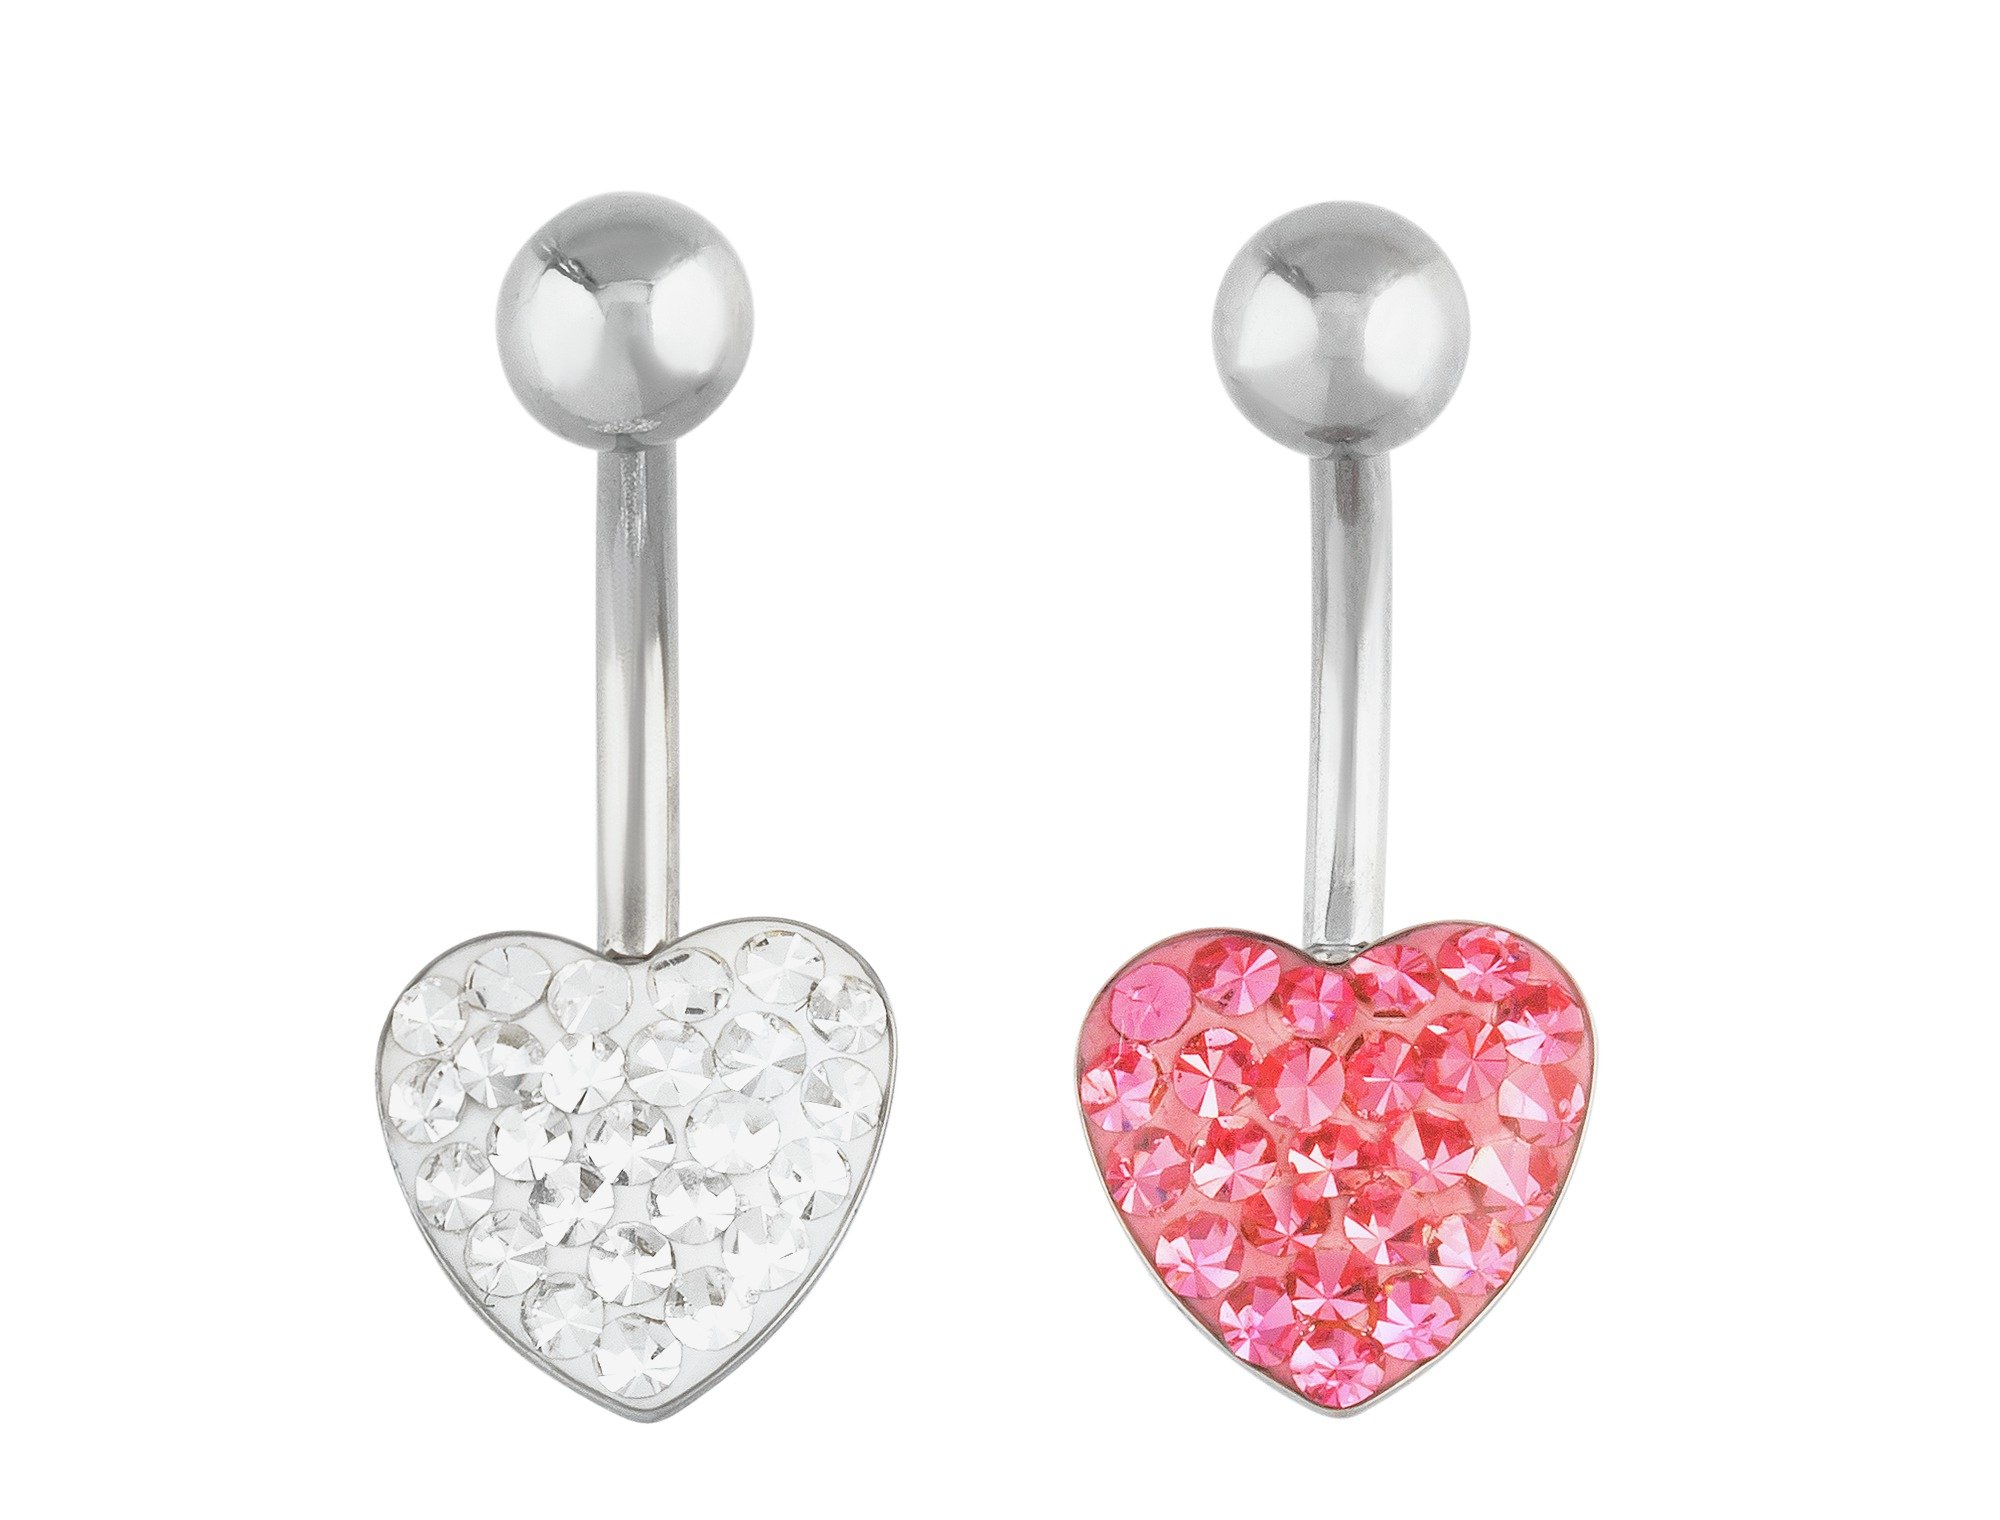 State of Mine Crystal Heart Belly Bars - Set of 2